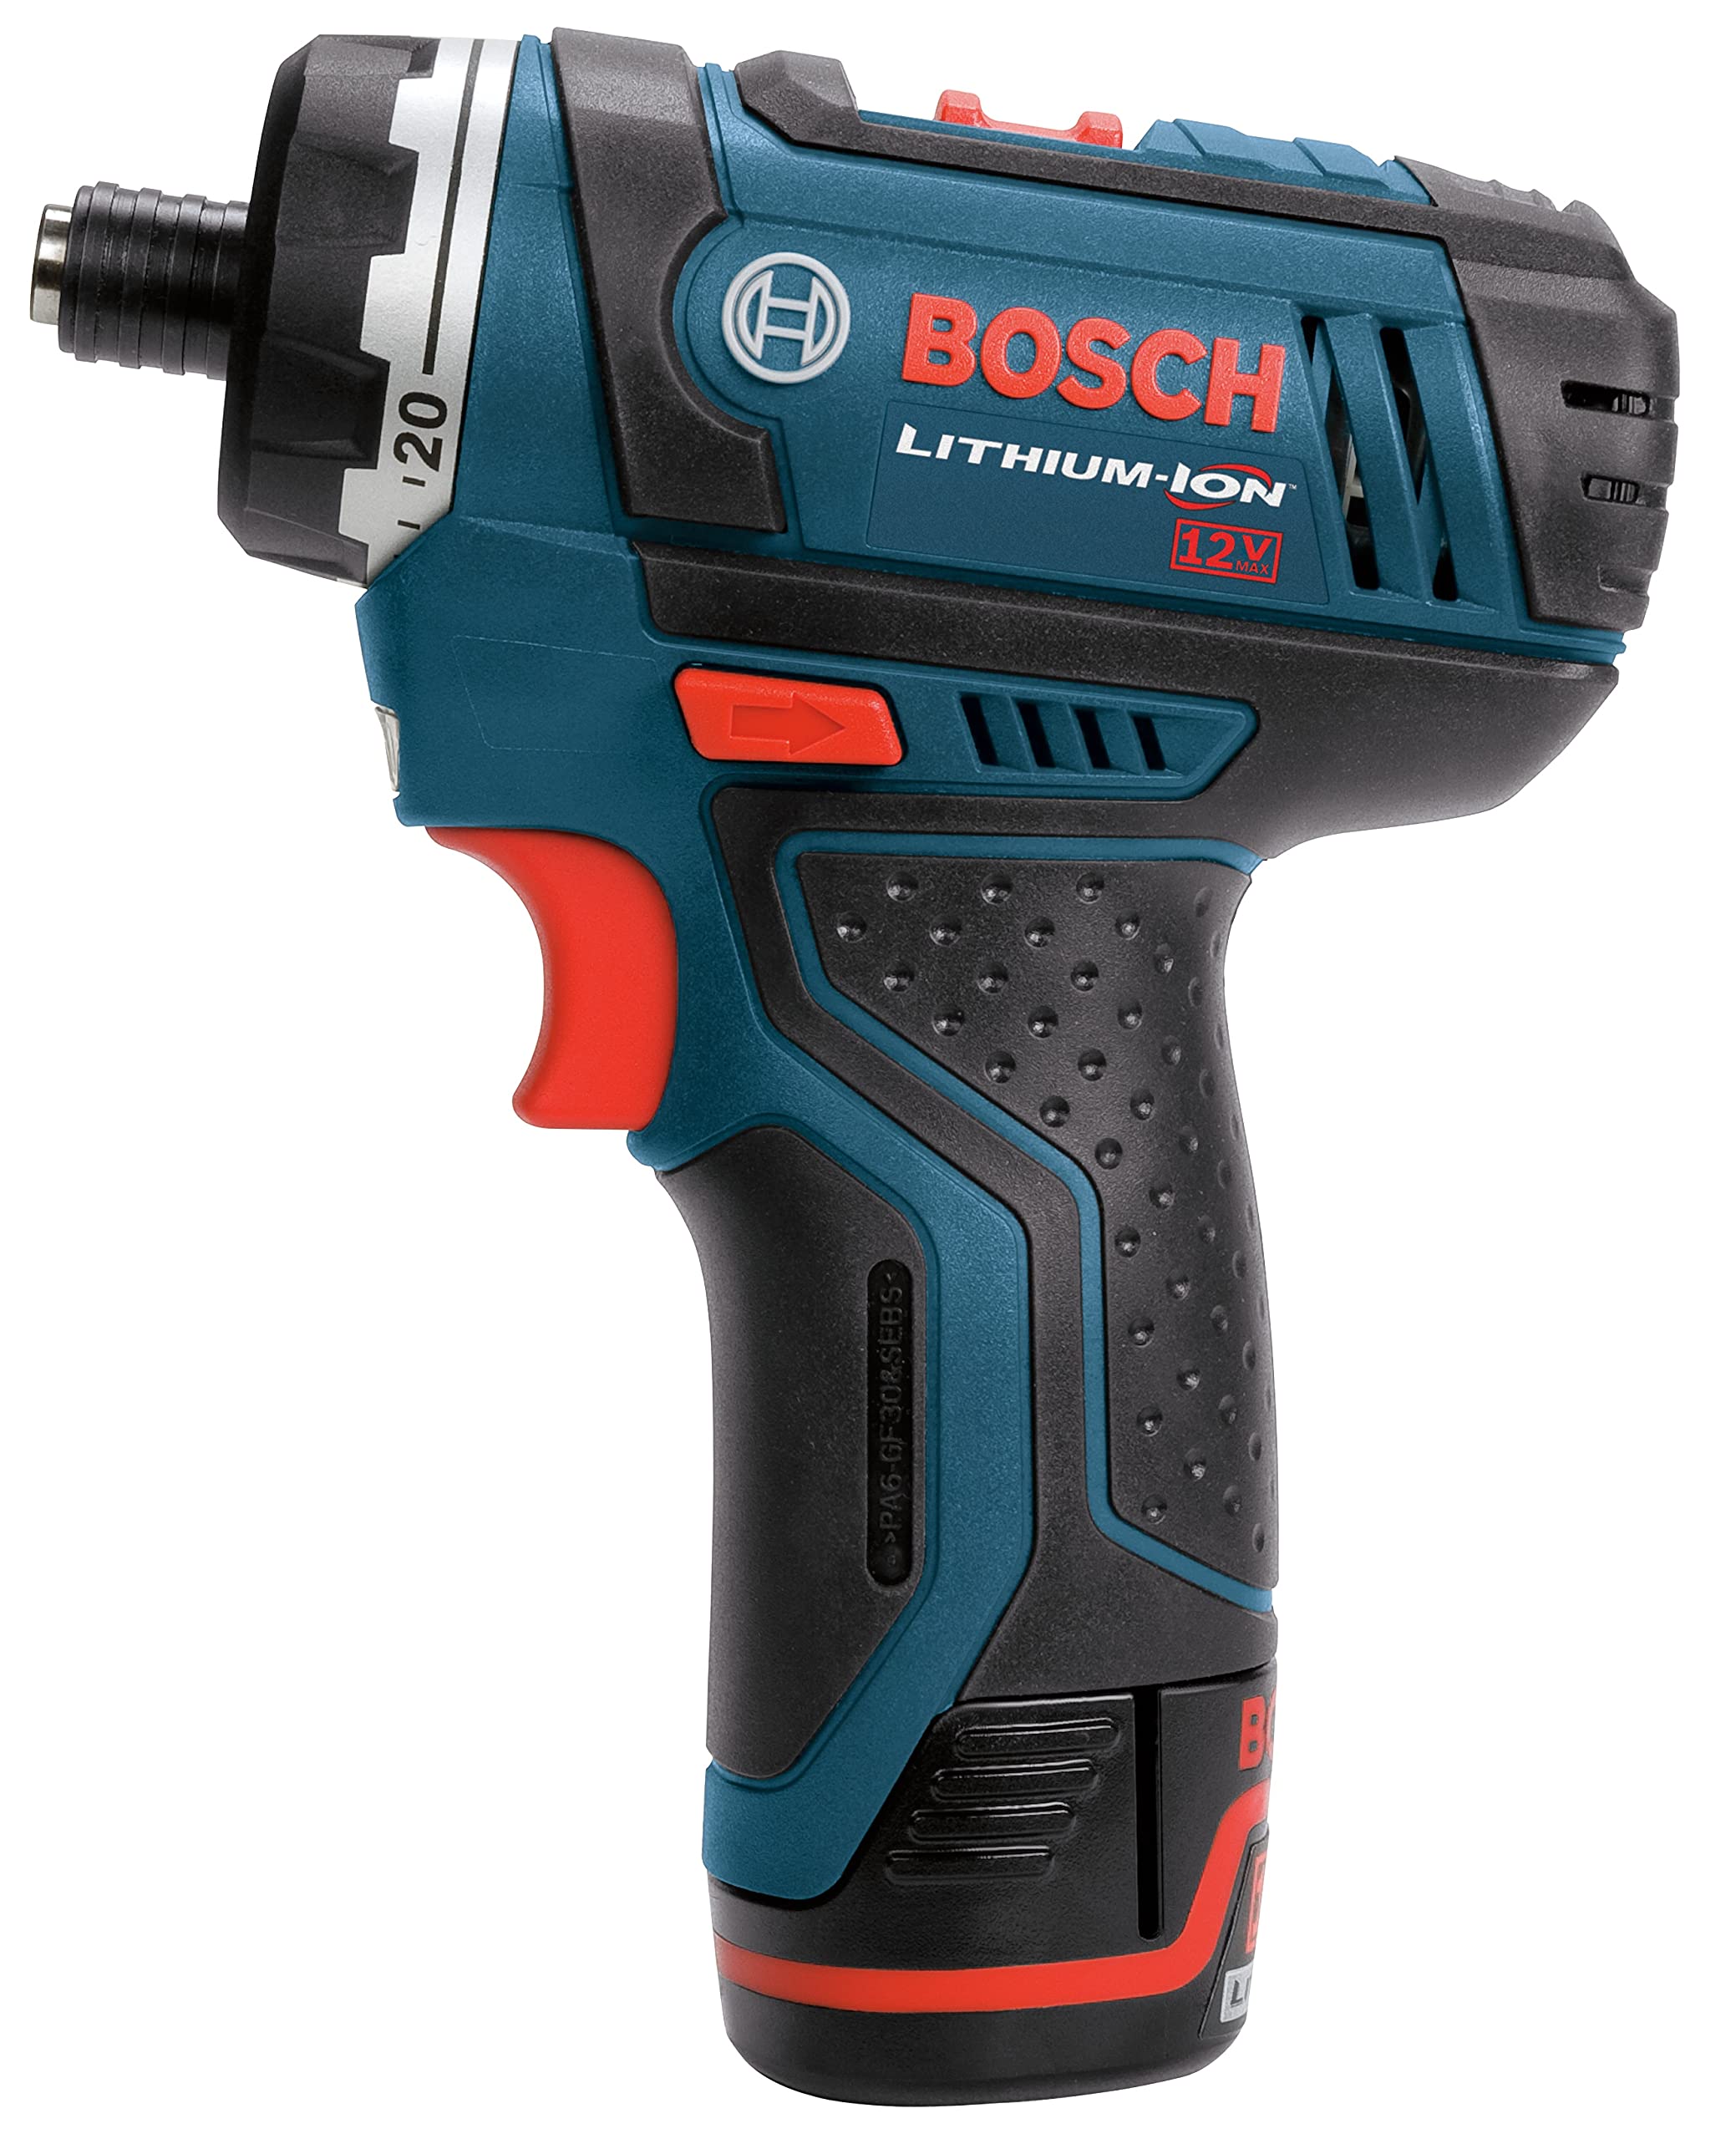 Bosch PS21-2A 12-Volt Max Lithium-Ion 2-Speed Pocket Driver Kit with 2 Batteries, Charger and Case w/ 41 pc drill and drive bit set